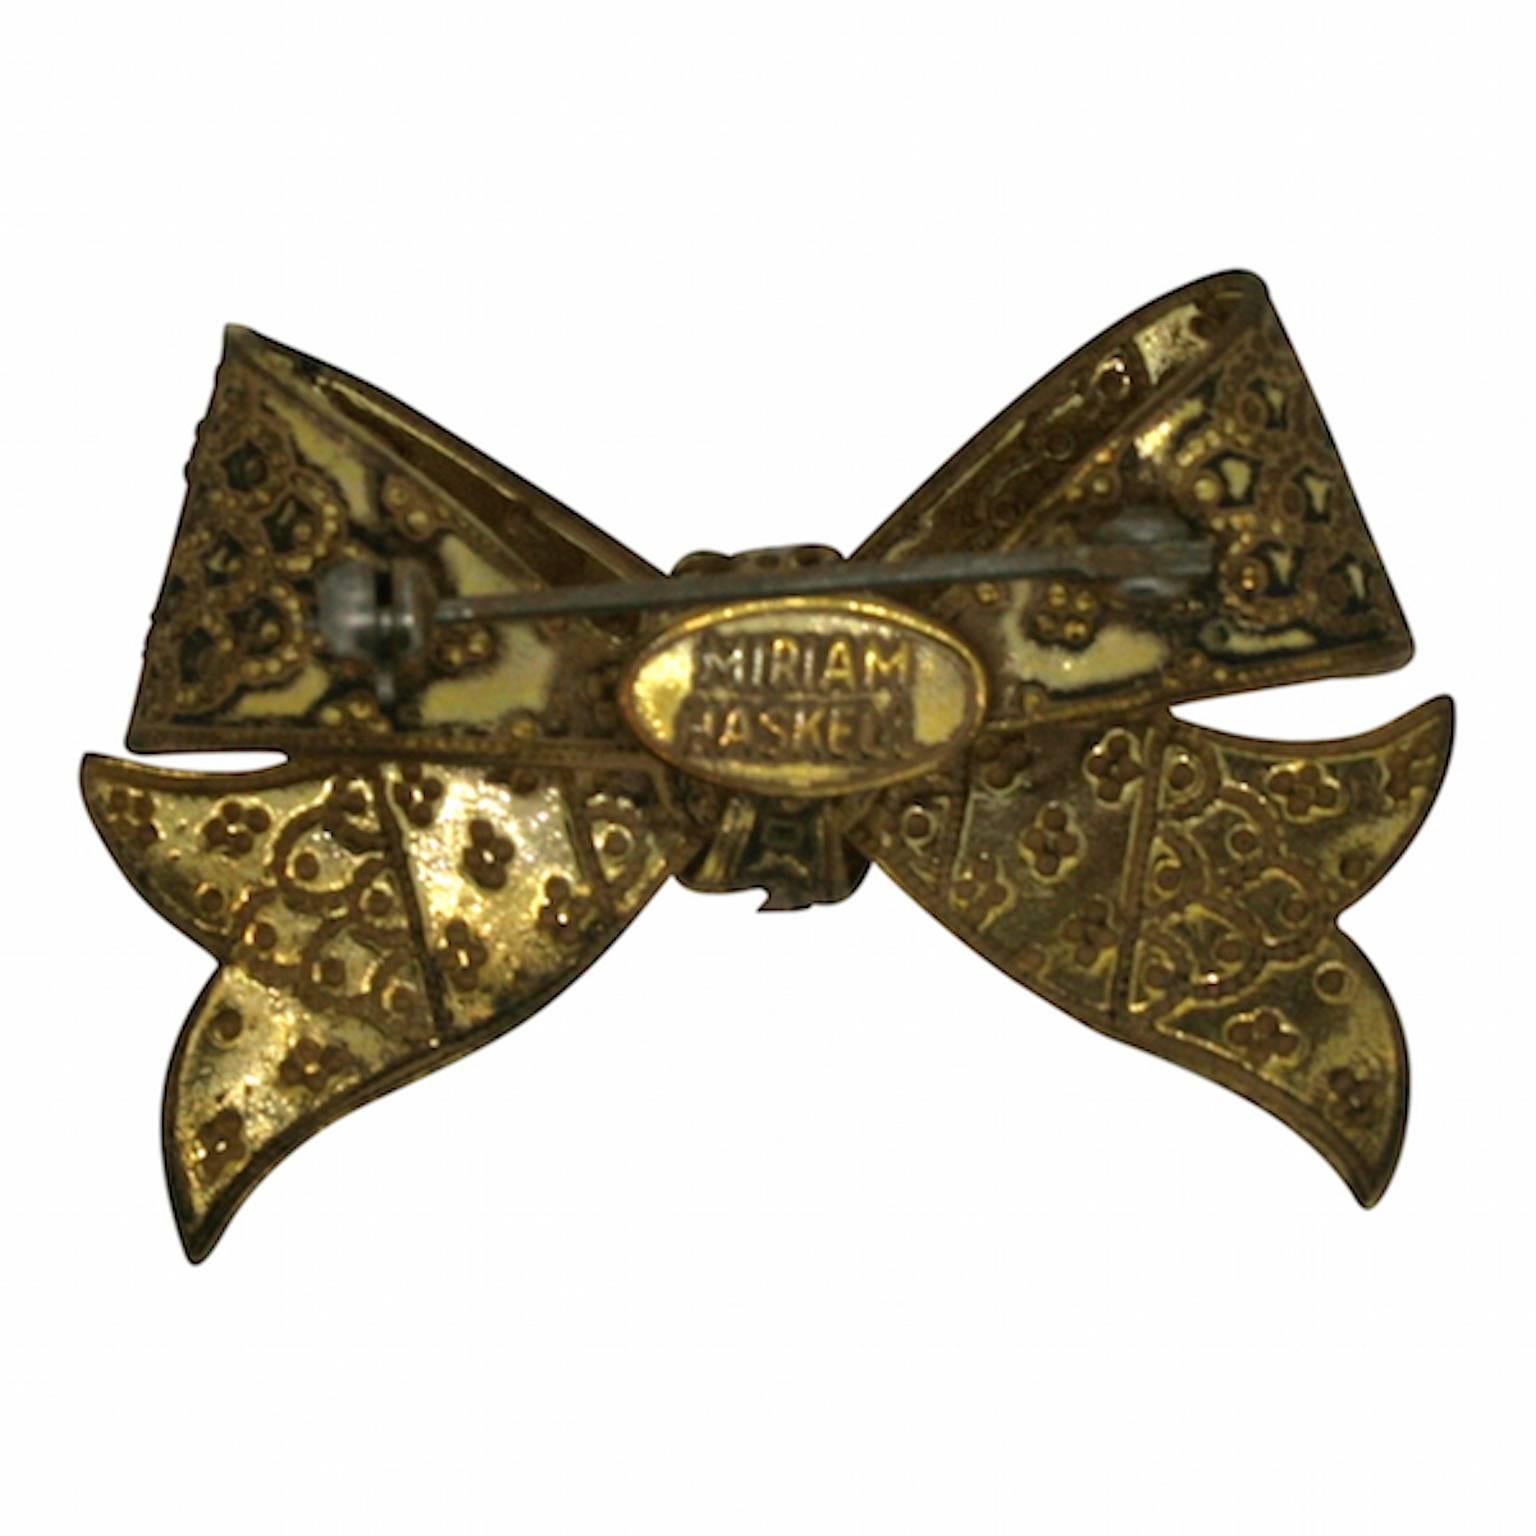 Miriam Haskell 1940s Vintage Bow Brooch In Good Condition For Sale In Wigan, GB